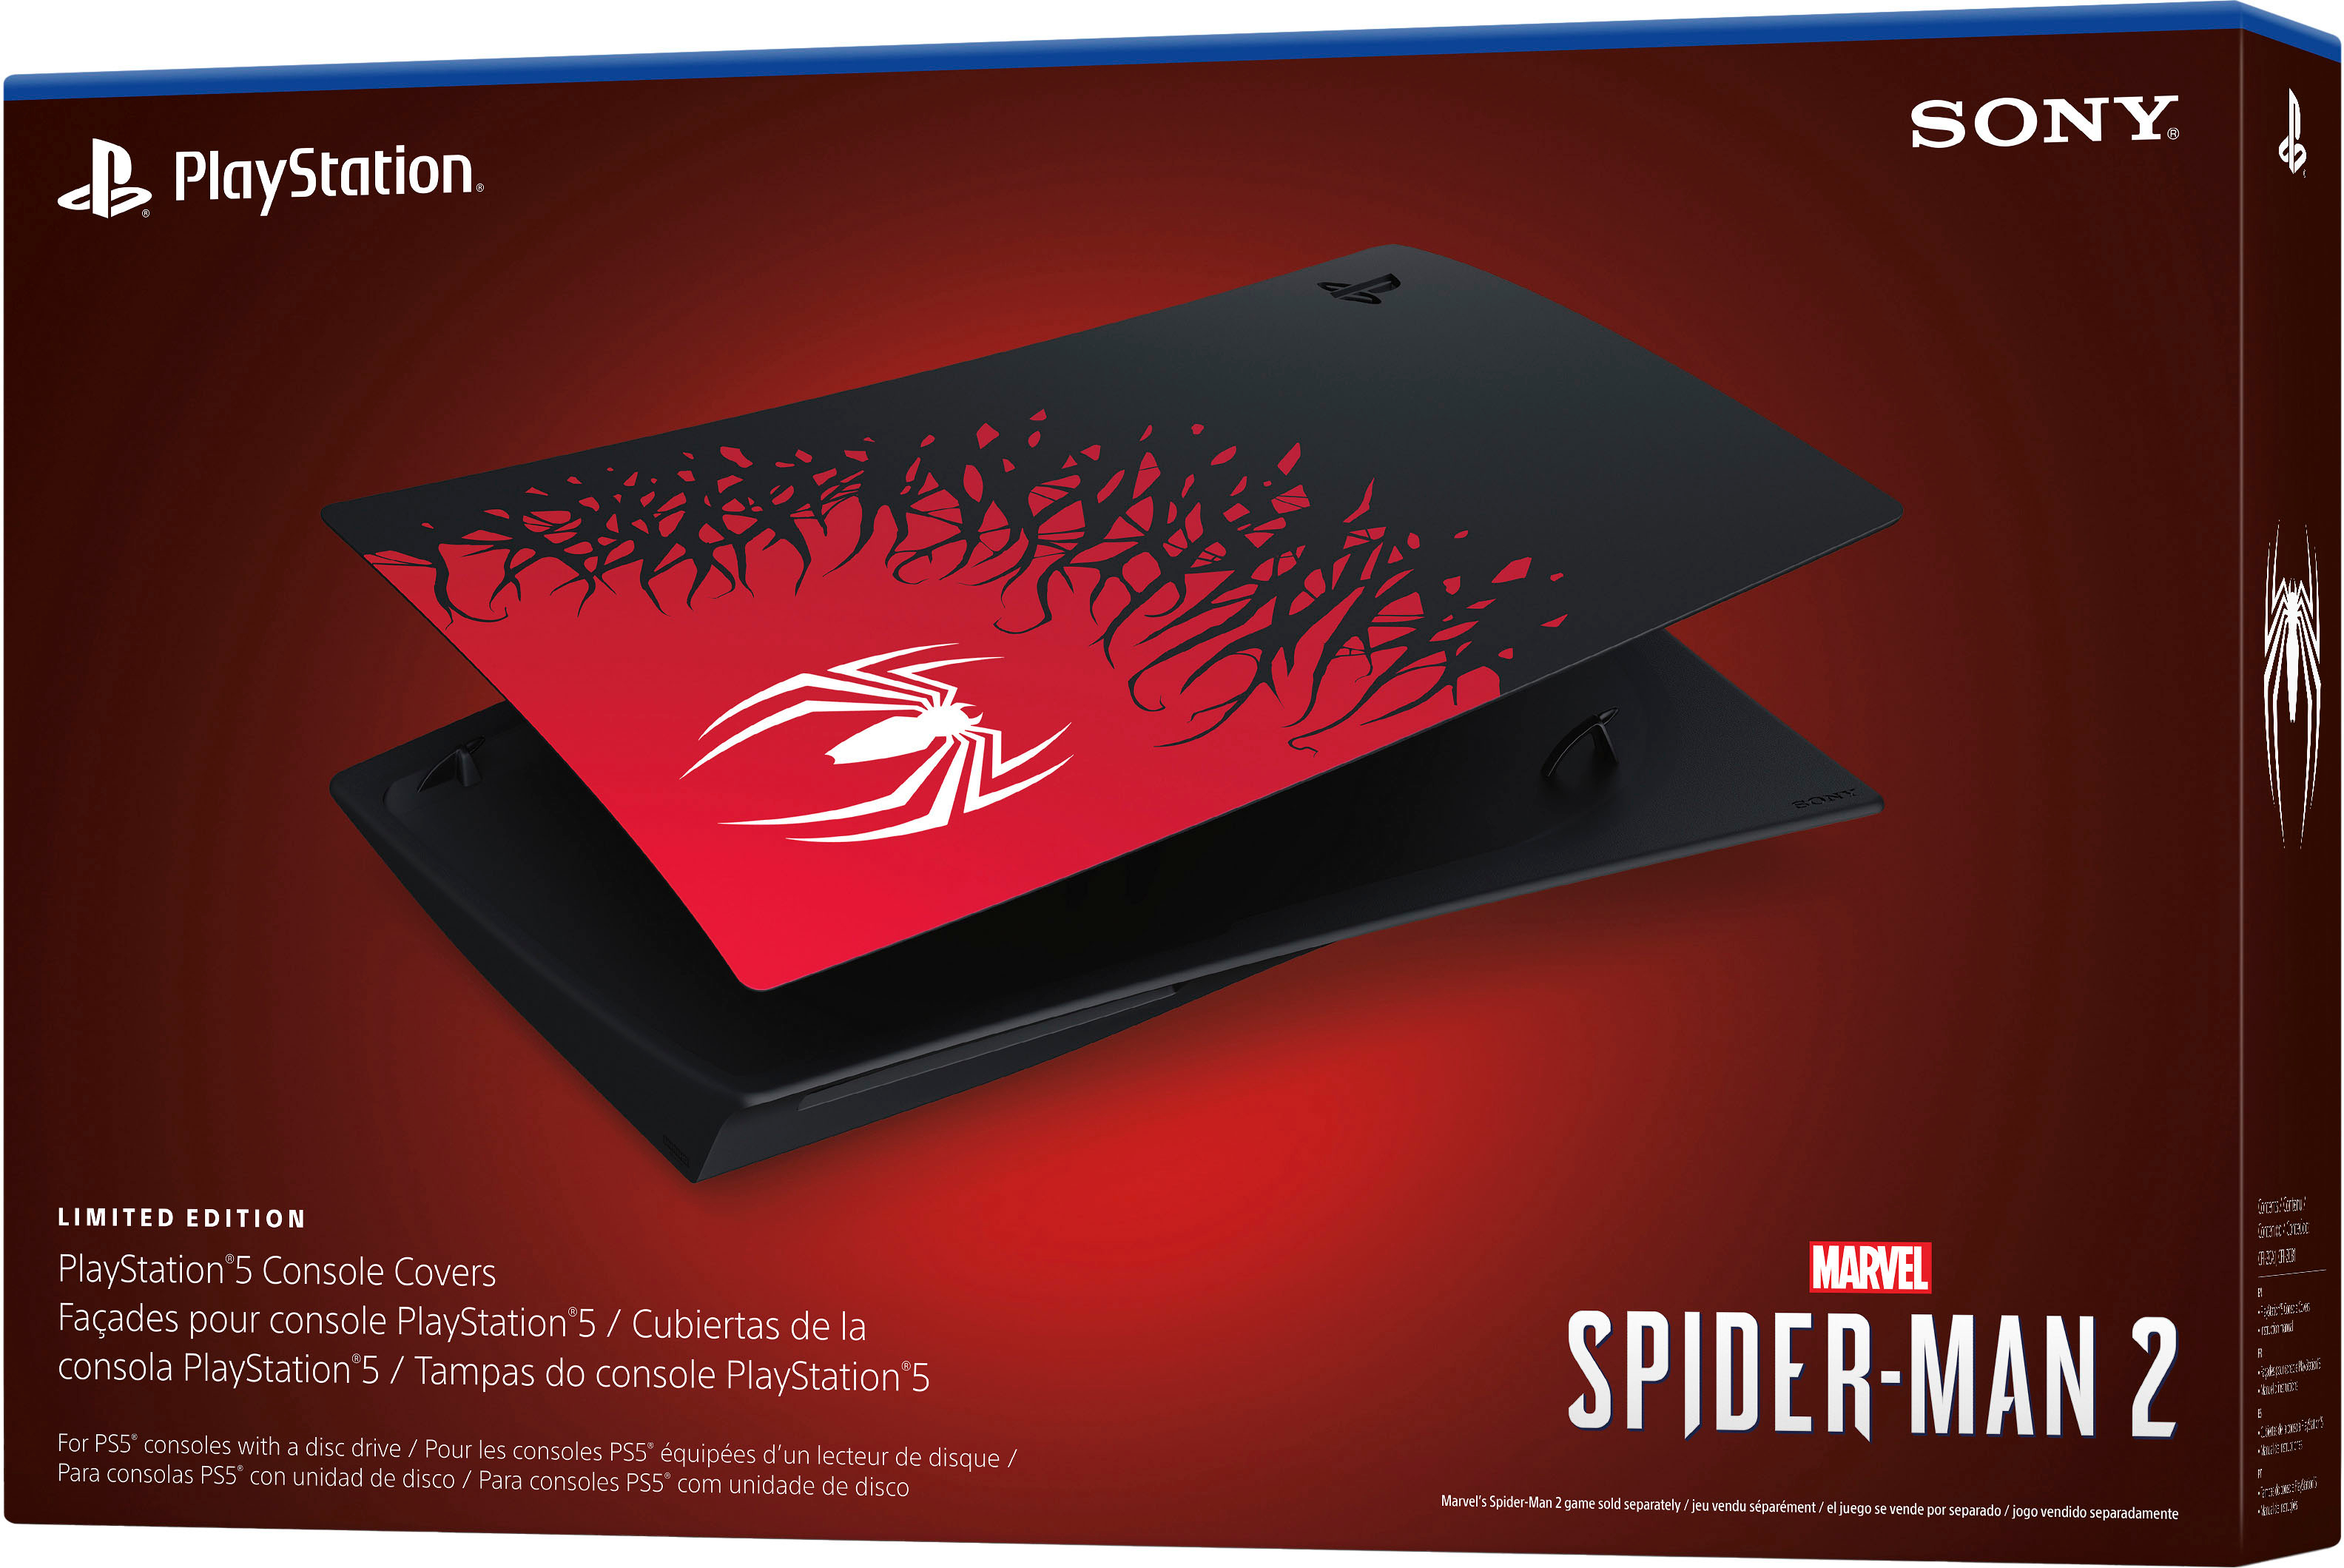 Where to preorder Sony's new Spider-Man PS5 console and